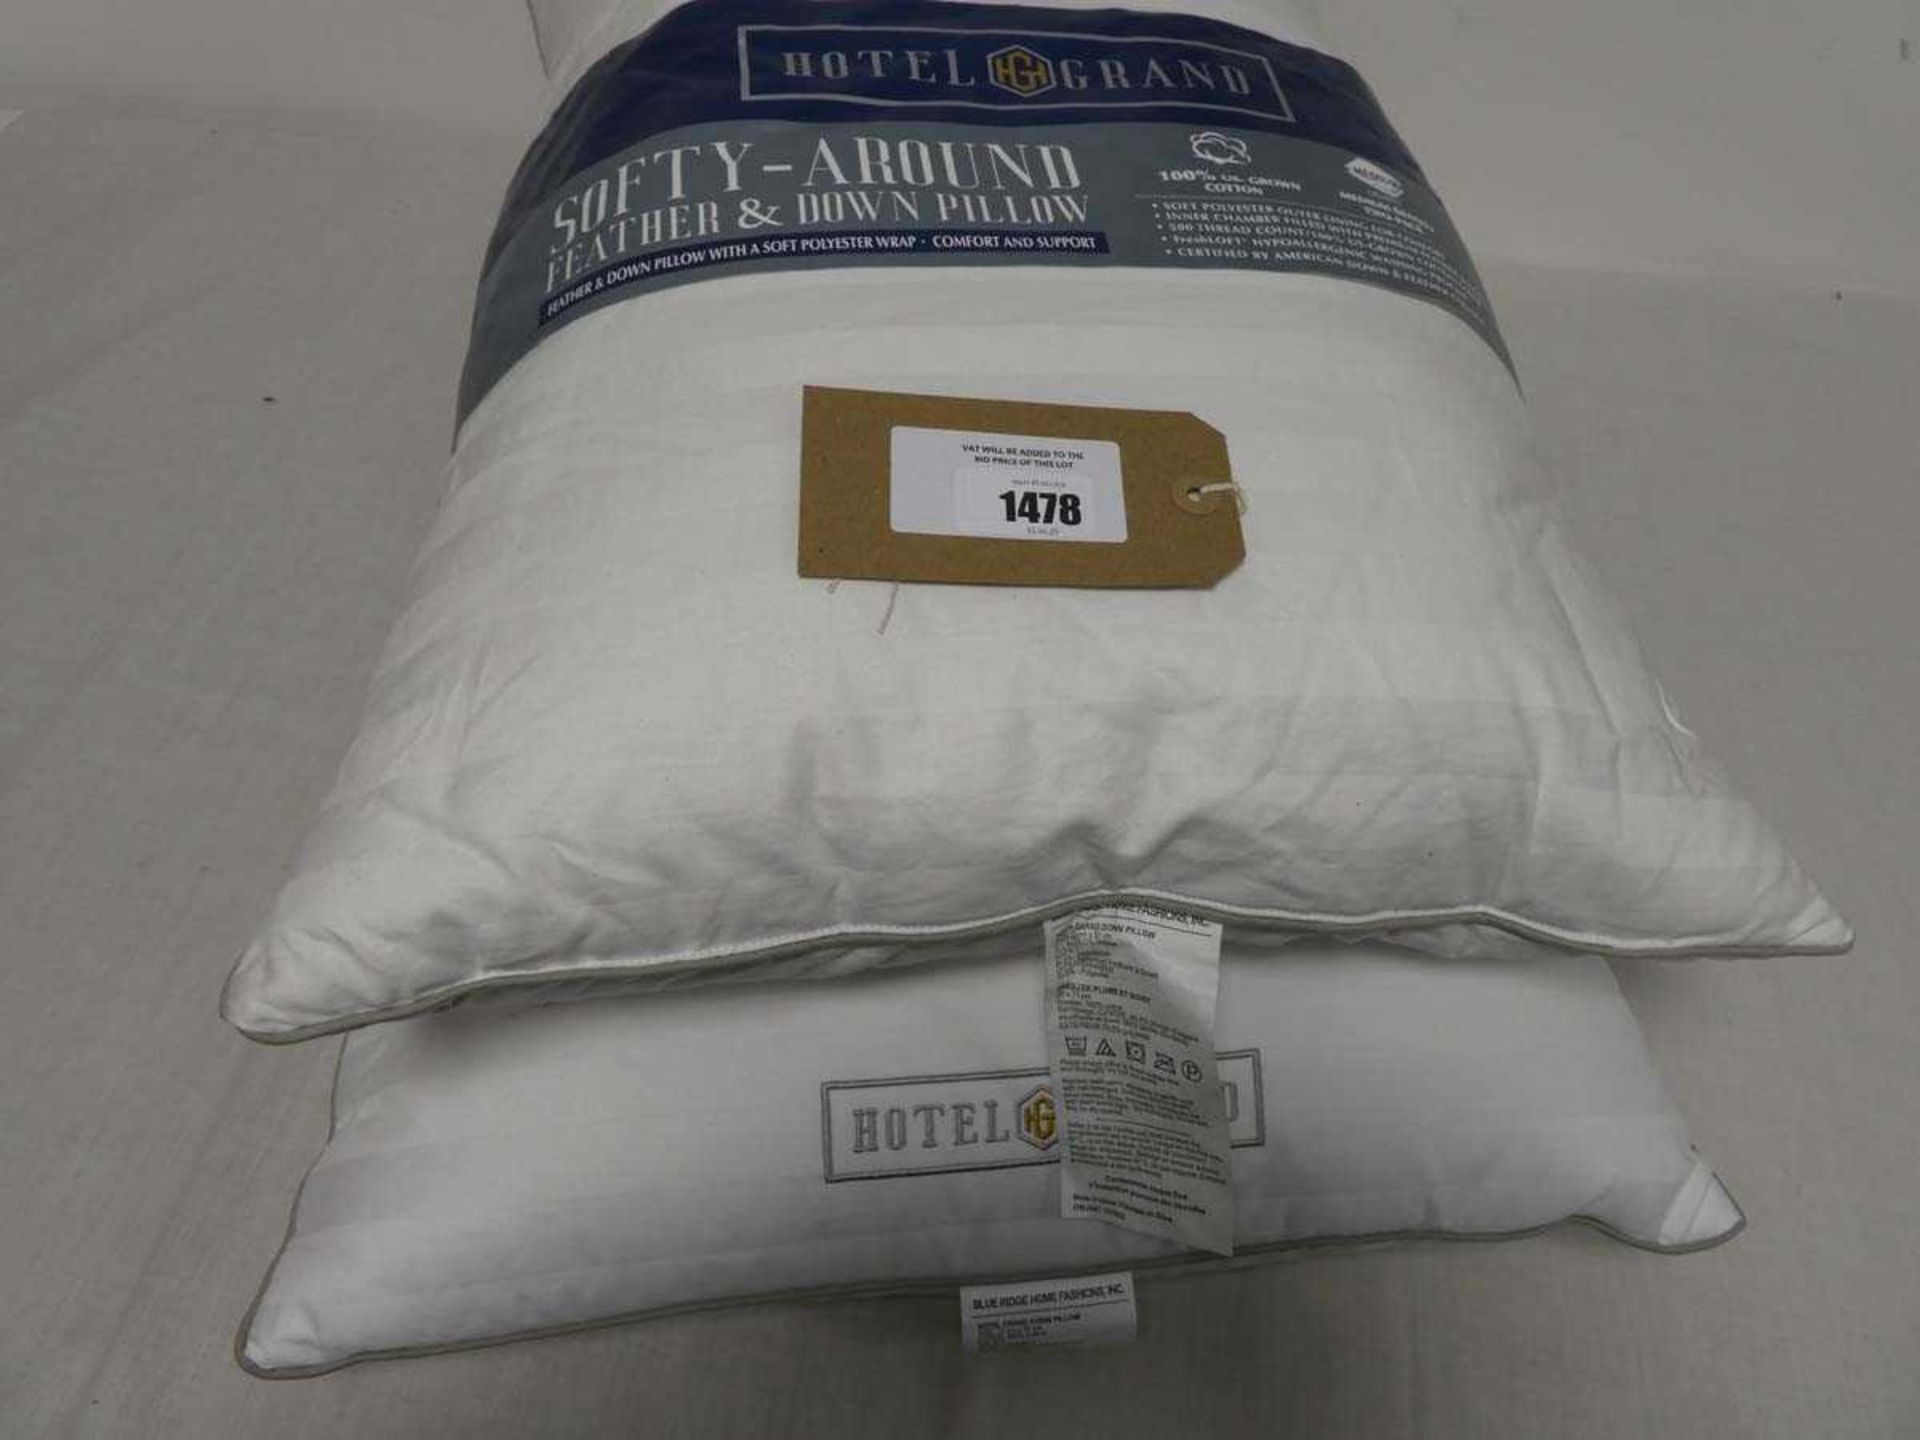 +VAT 2 Hotel Grand feather and down pillows